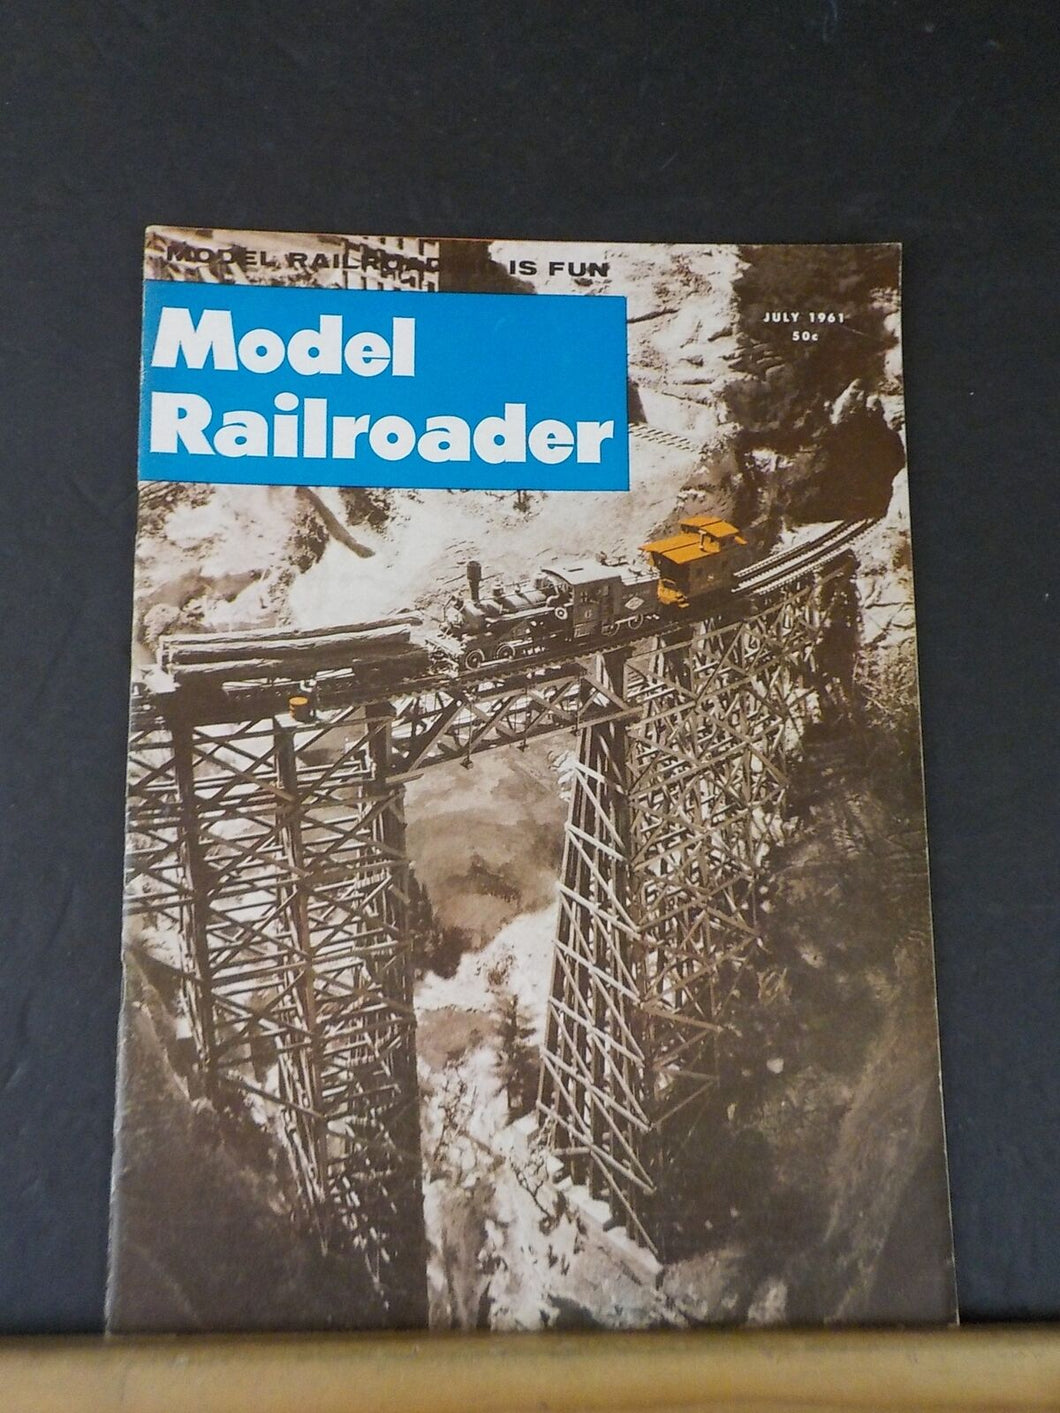 Model Railroader Magazine 1961 July A place for people Flat, box and gondola car